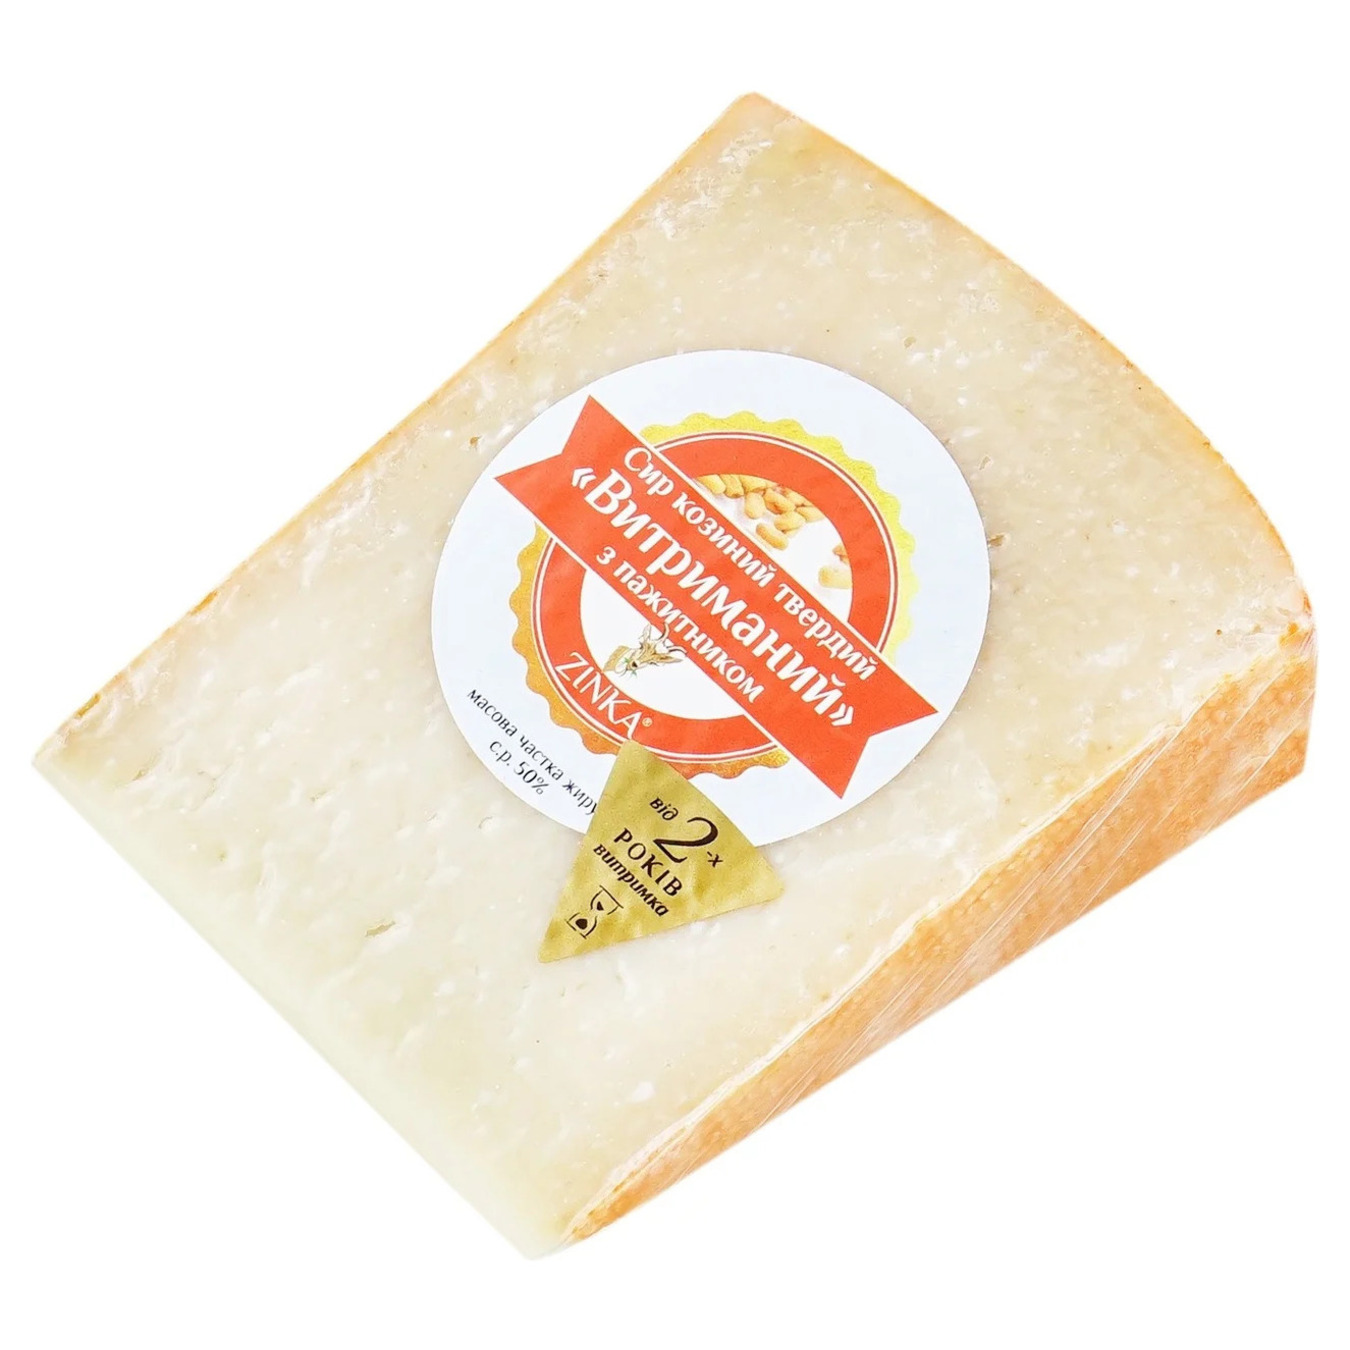 Zinka hard goat's cheese aged with fenugreek 50% by weight